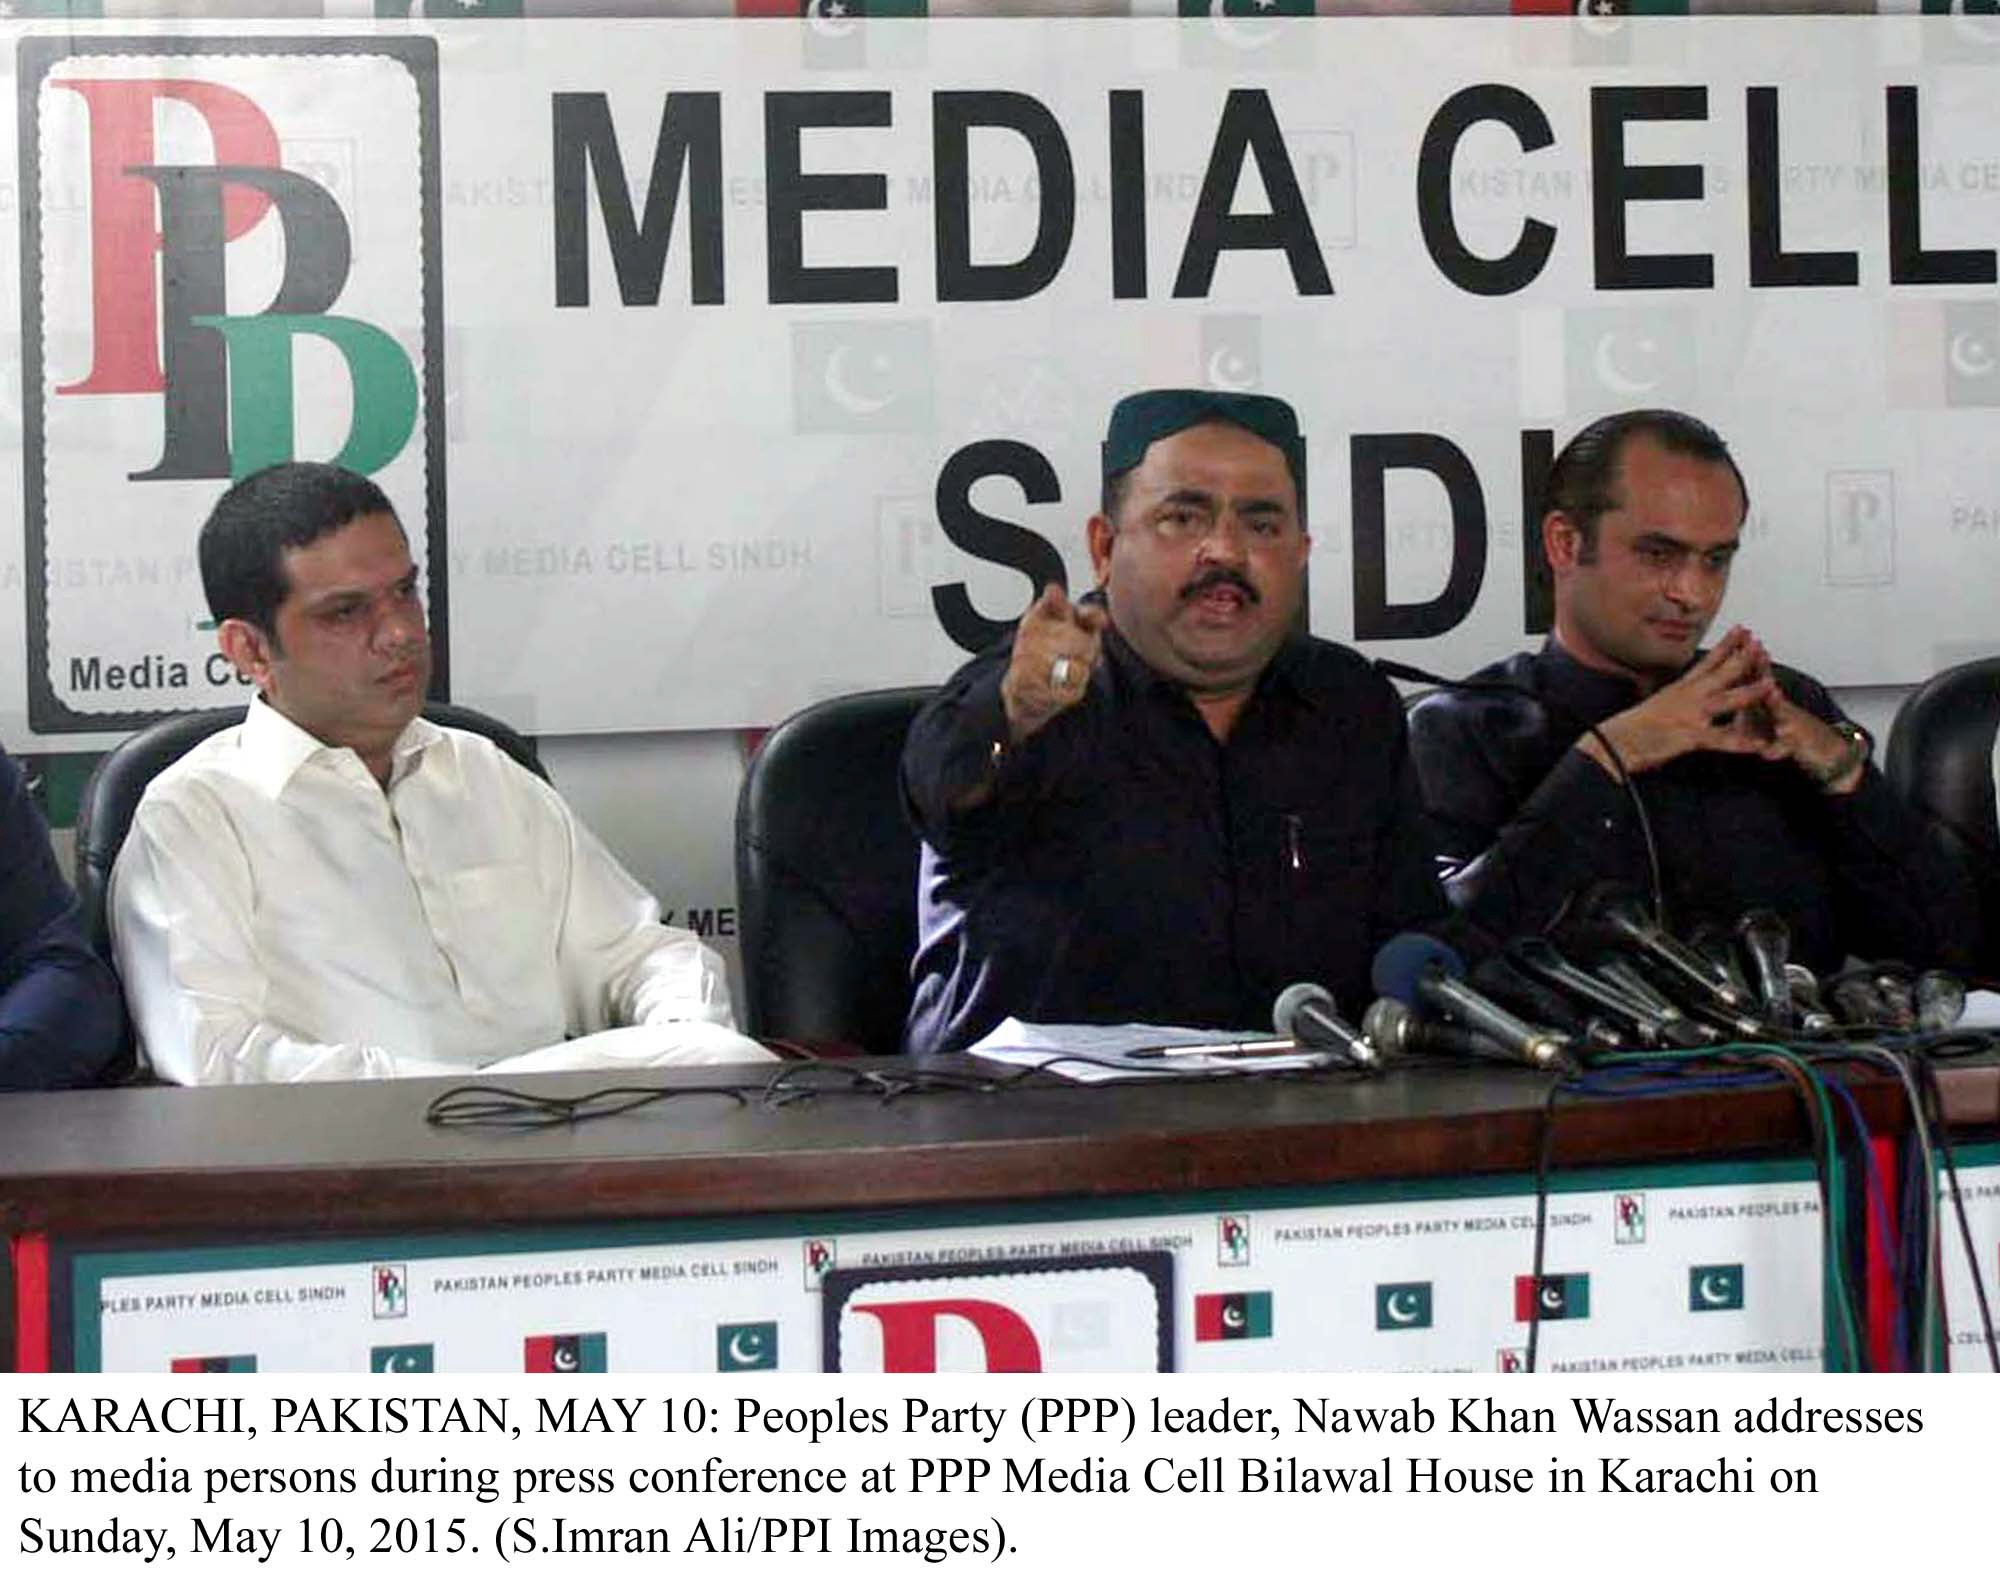 ppp leaders address media persons during a press conference at the ppp media cell bilawal house in karachi photo ppi